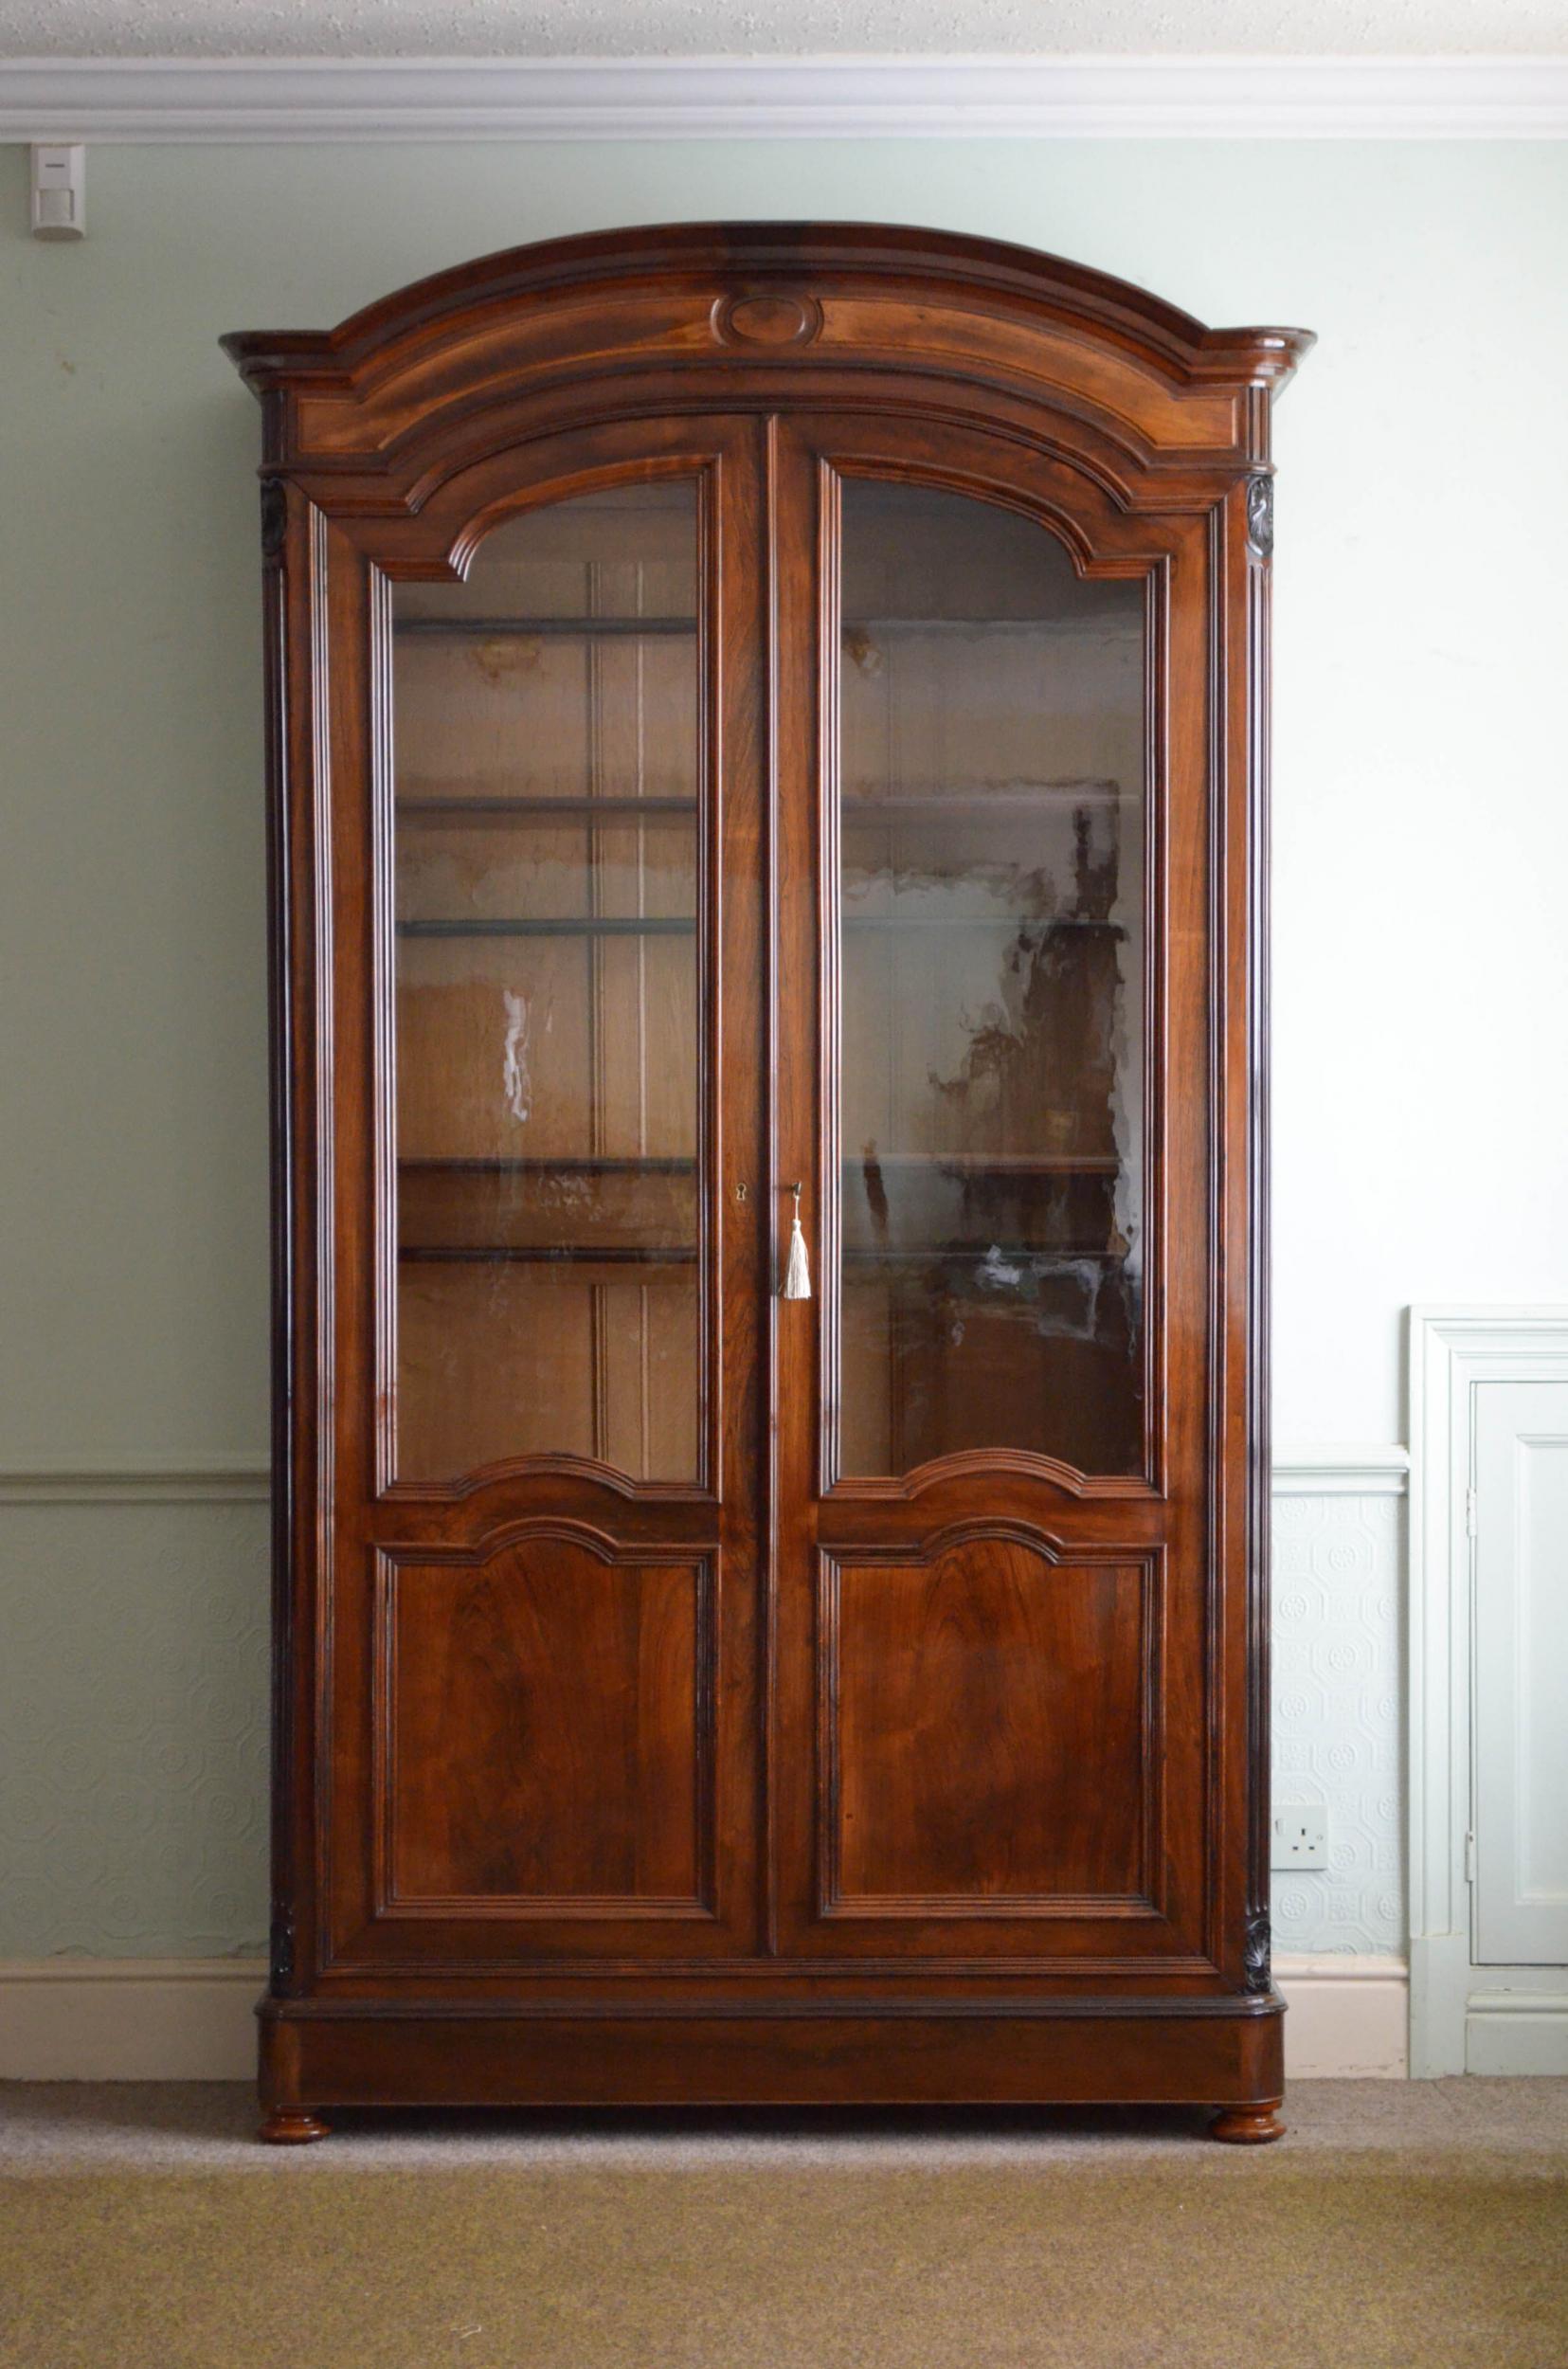 Sn5100 elegant and very capacious 19th century display cabinet or bookcase in rosewood, having arched top with fielded frieze above a pair of glazed doors retaining its original glass, fitted with original working lock and a key and moulded panels